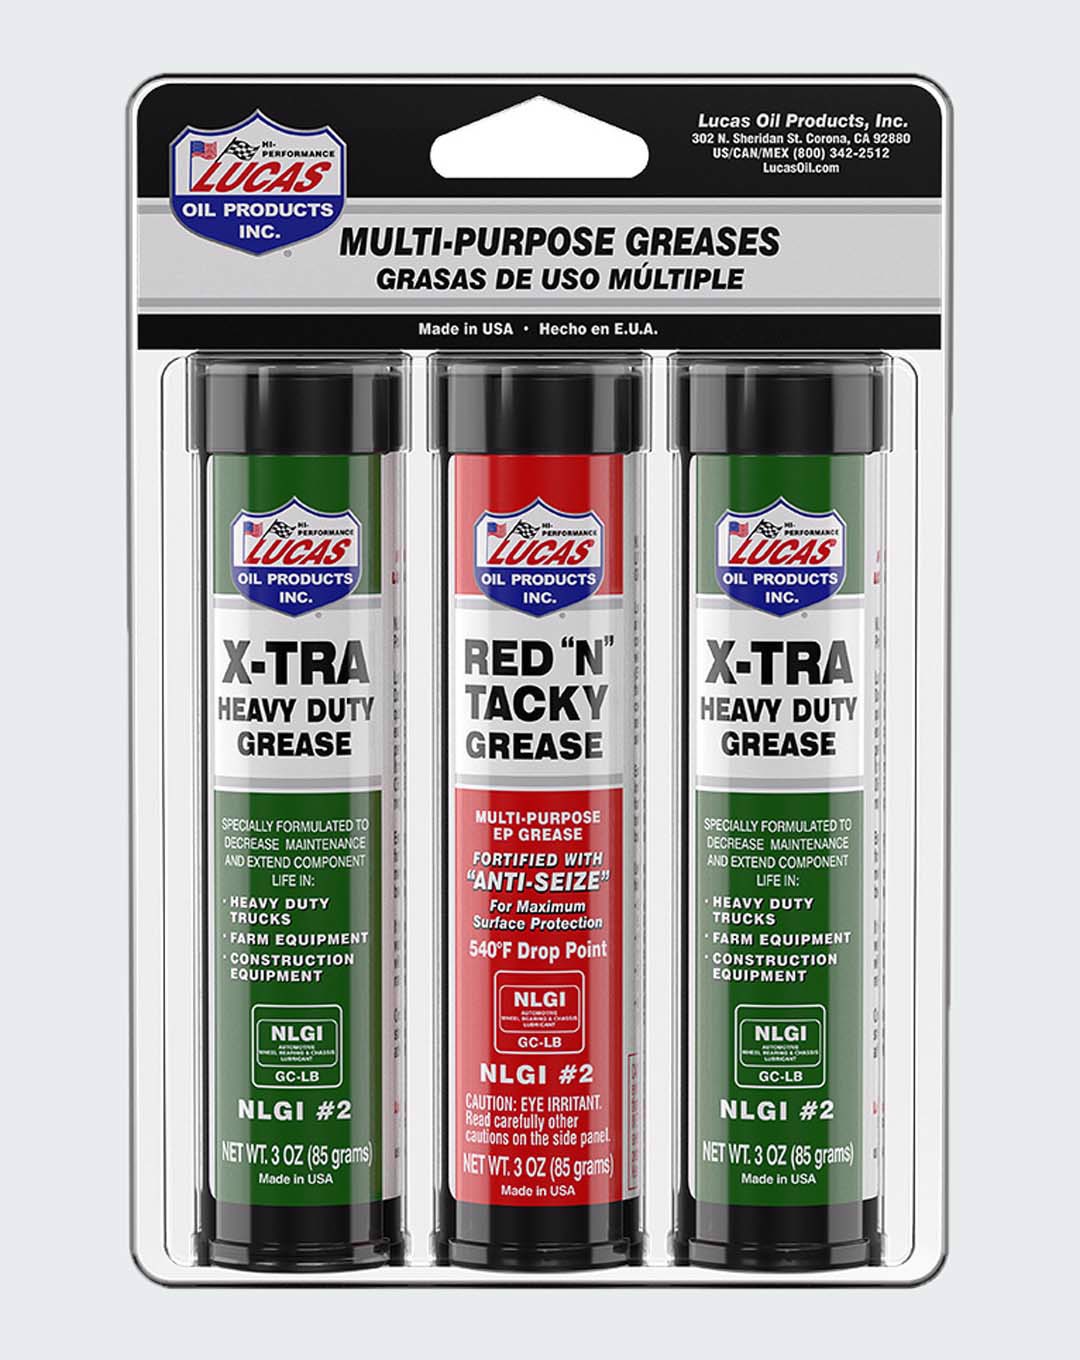 https://topperformance.qa/images/thumbs/0001629_lucas-oil-x-tra-red-tacky-grease-pack-10315.jpg